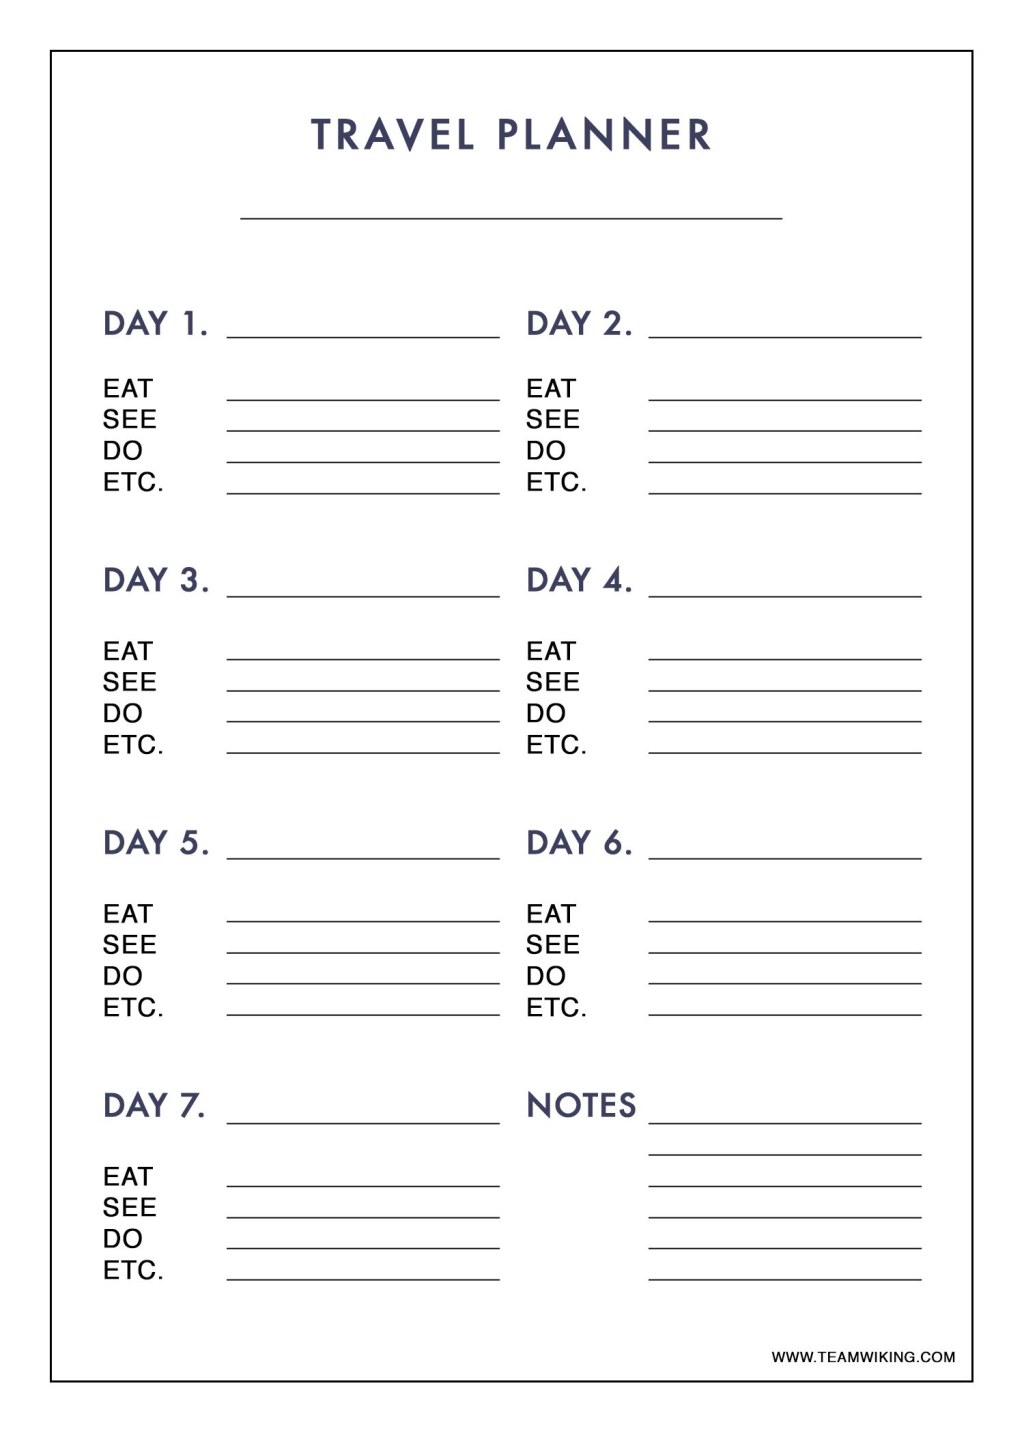 Picture of: Team Wiking  Printable Travel Planner  http://www.teamwiking